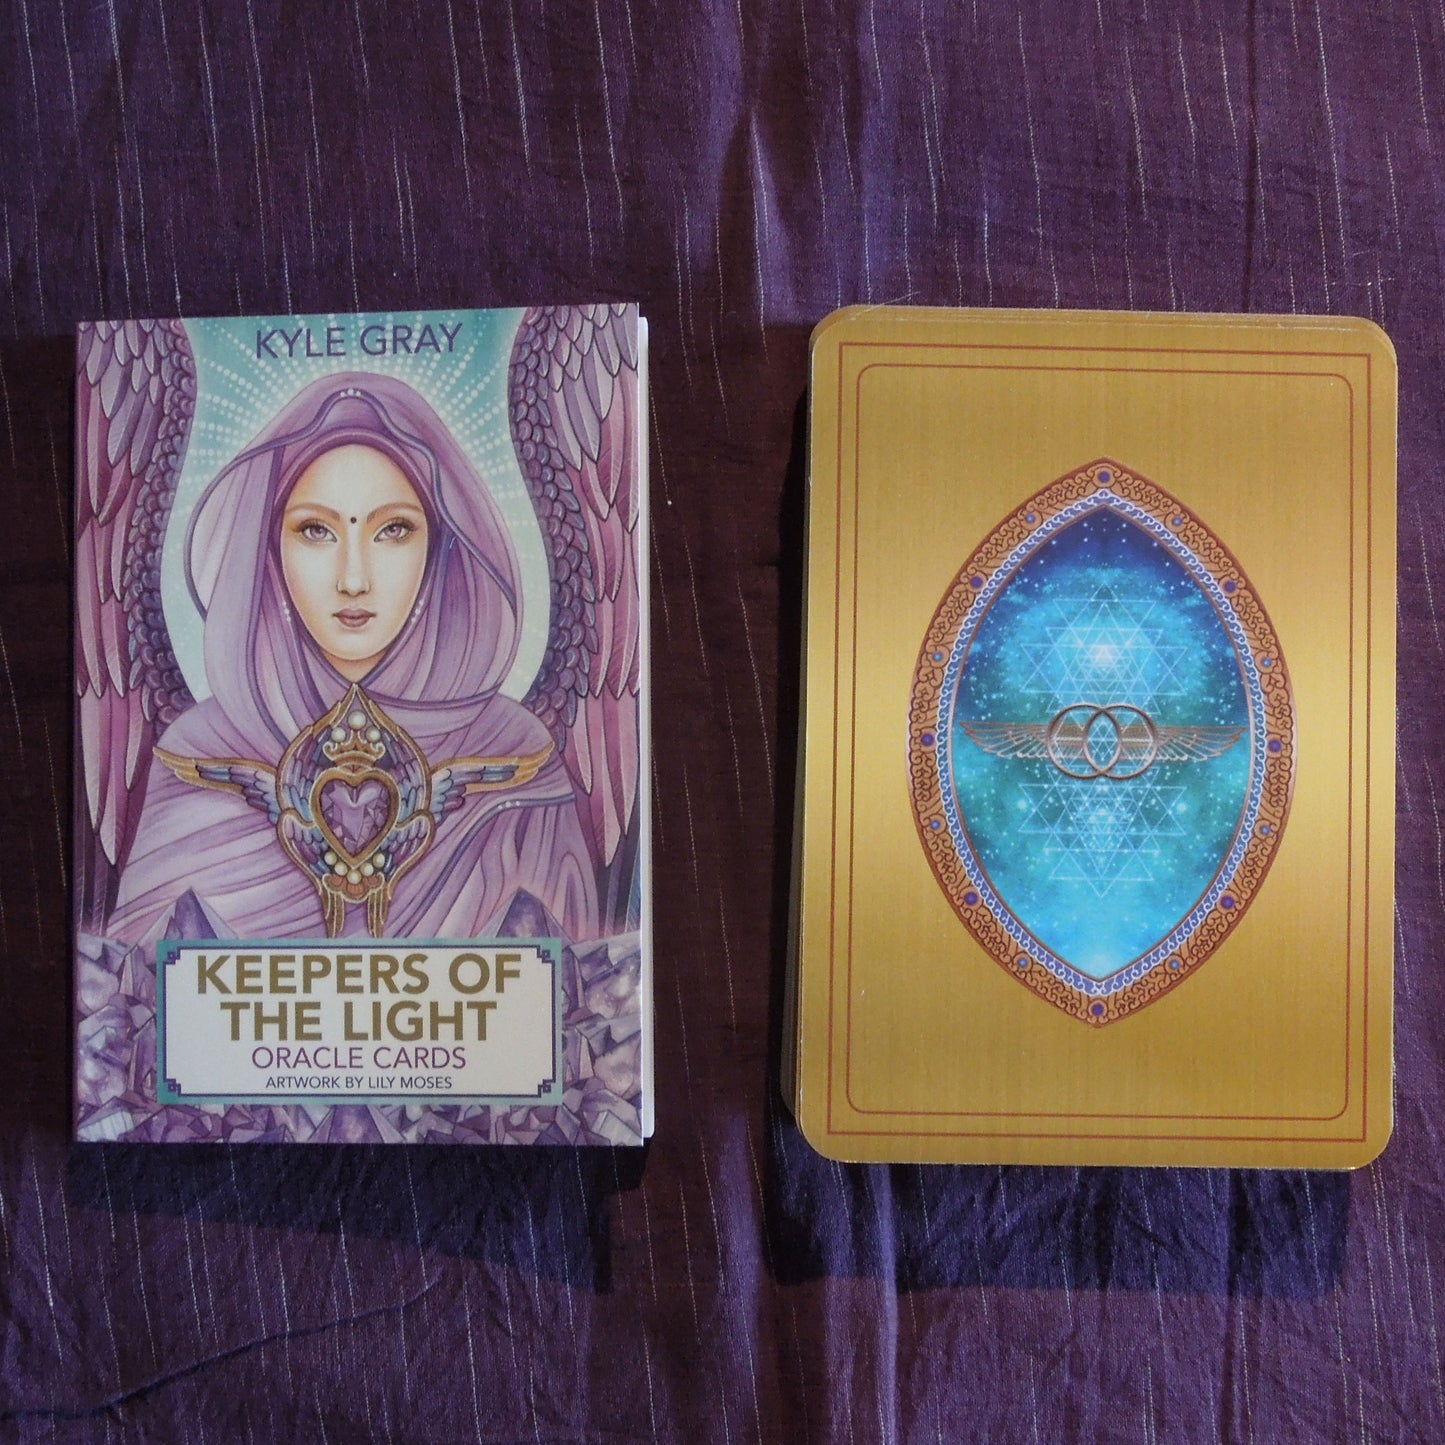 Keepers of the light Oracle Cards